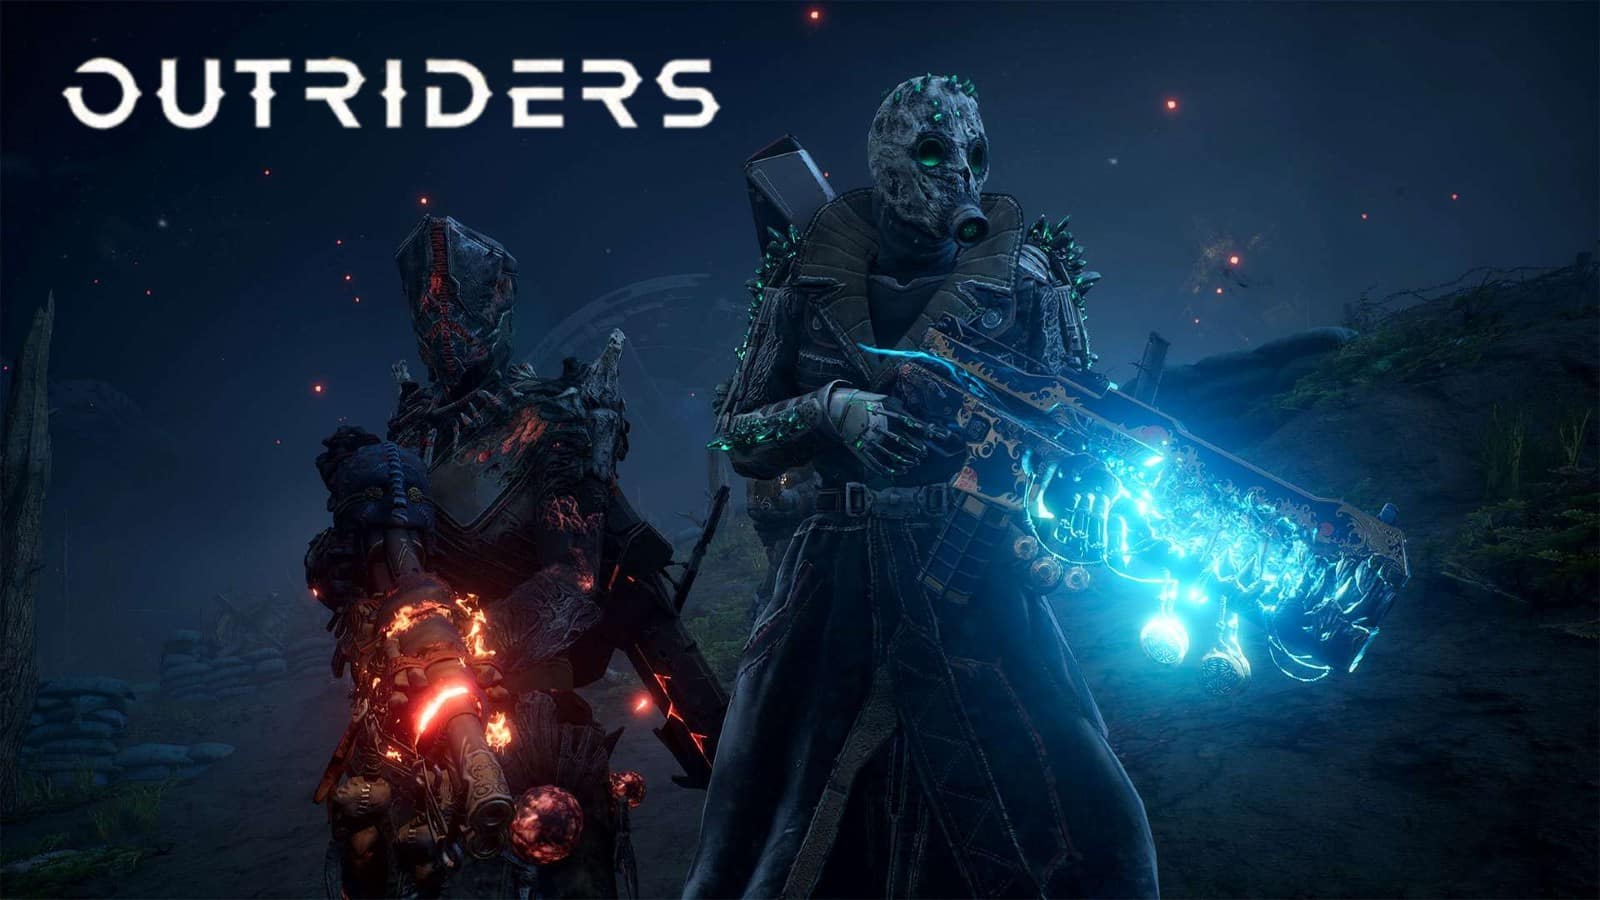 Outriders XP guide